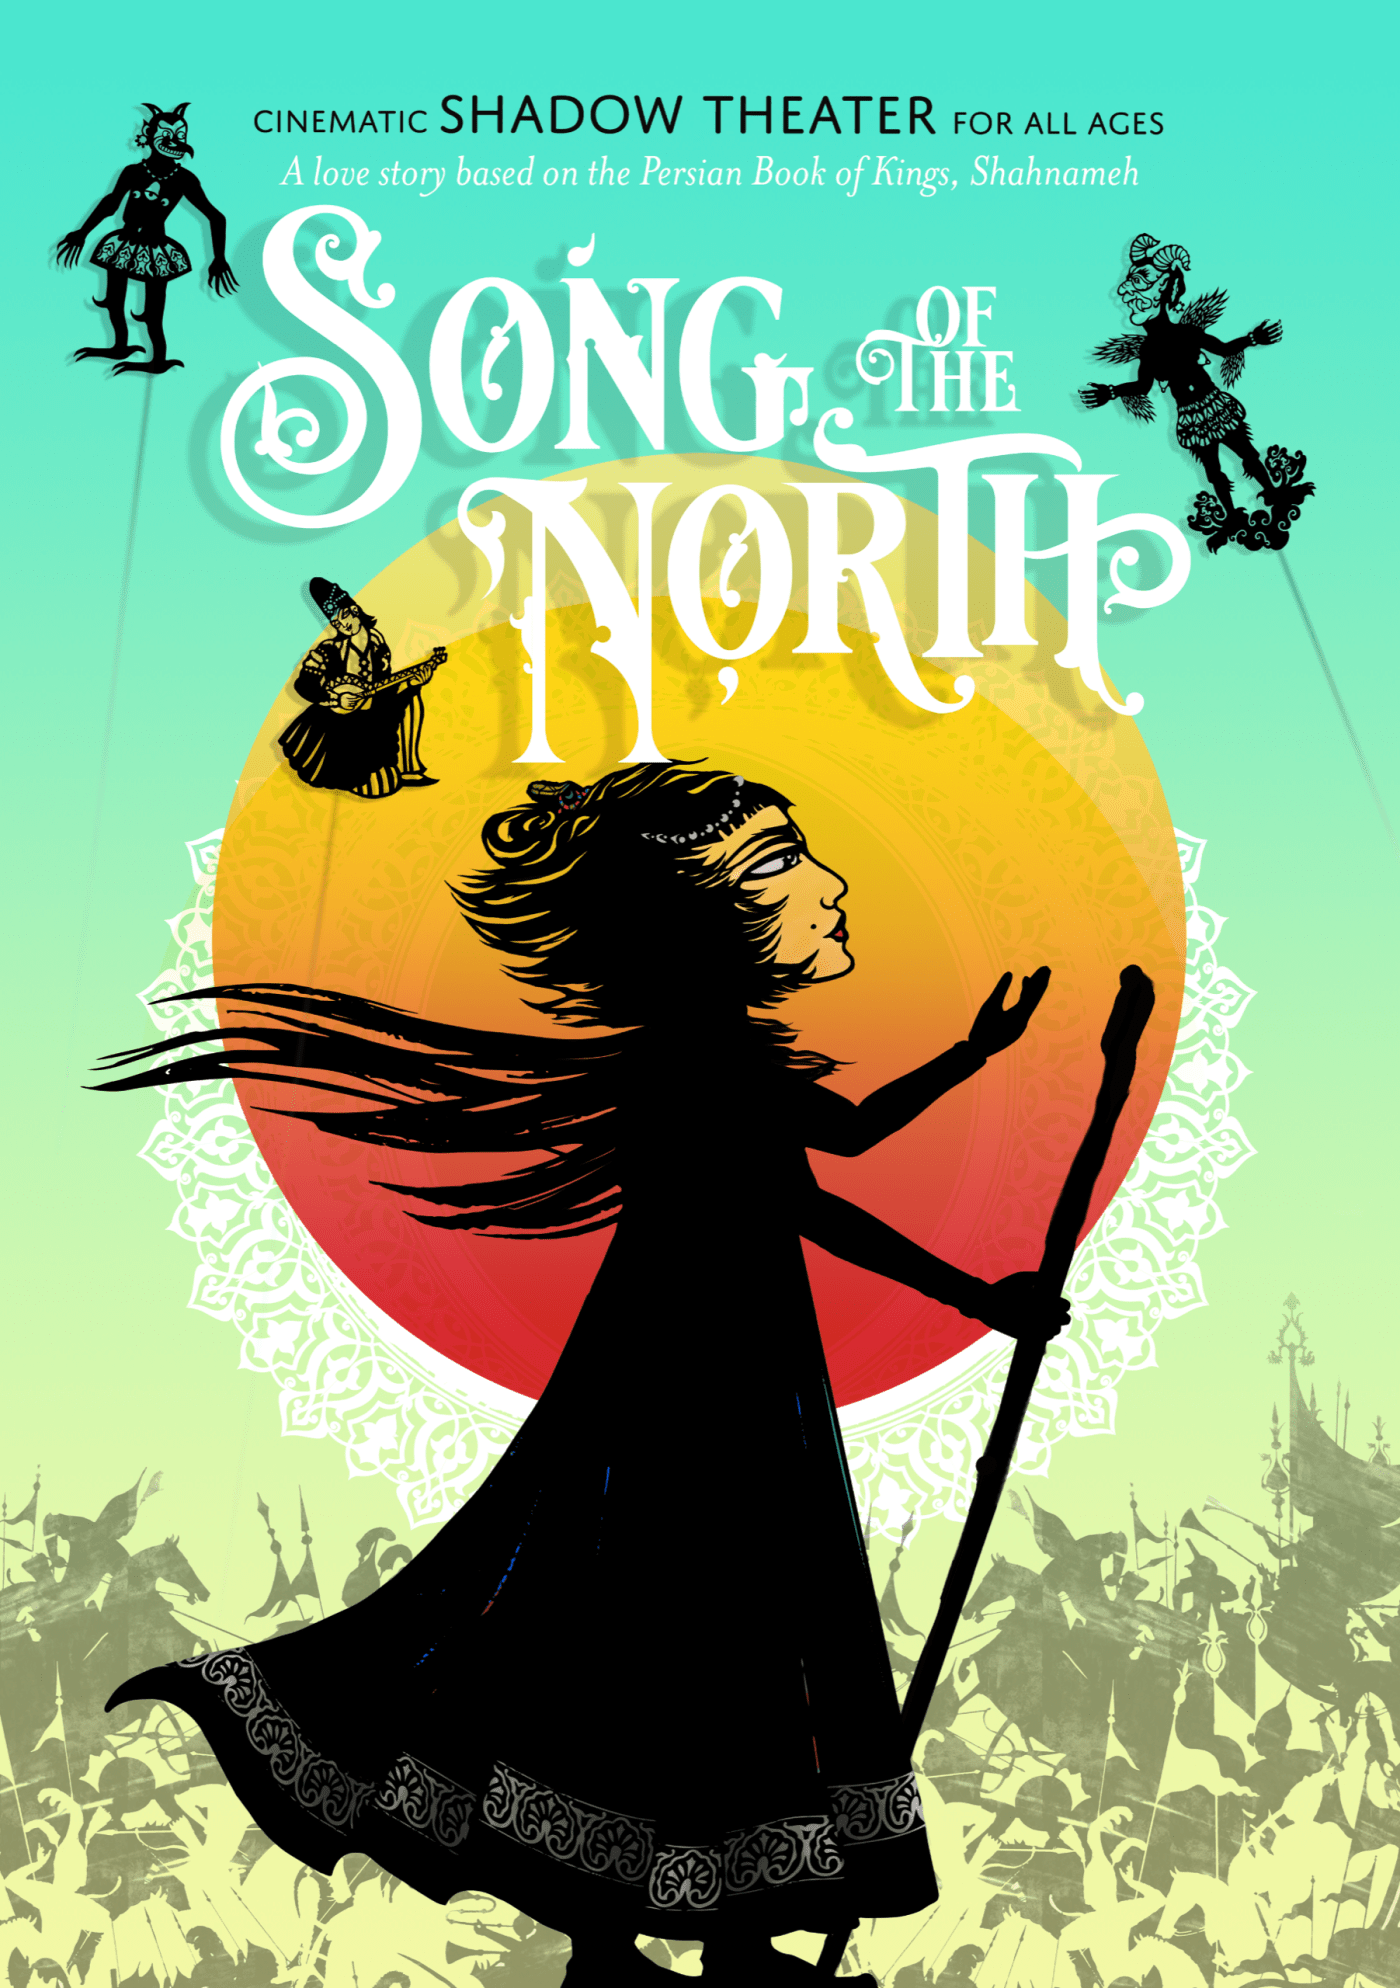 Song of the North poster art features the title and a woman with a staff in front of the sun.